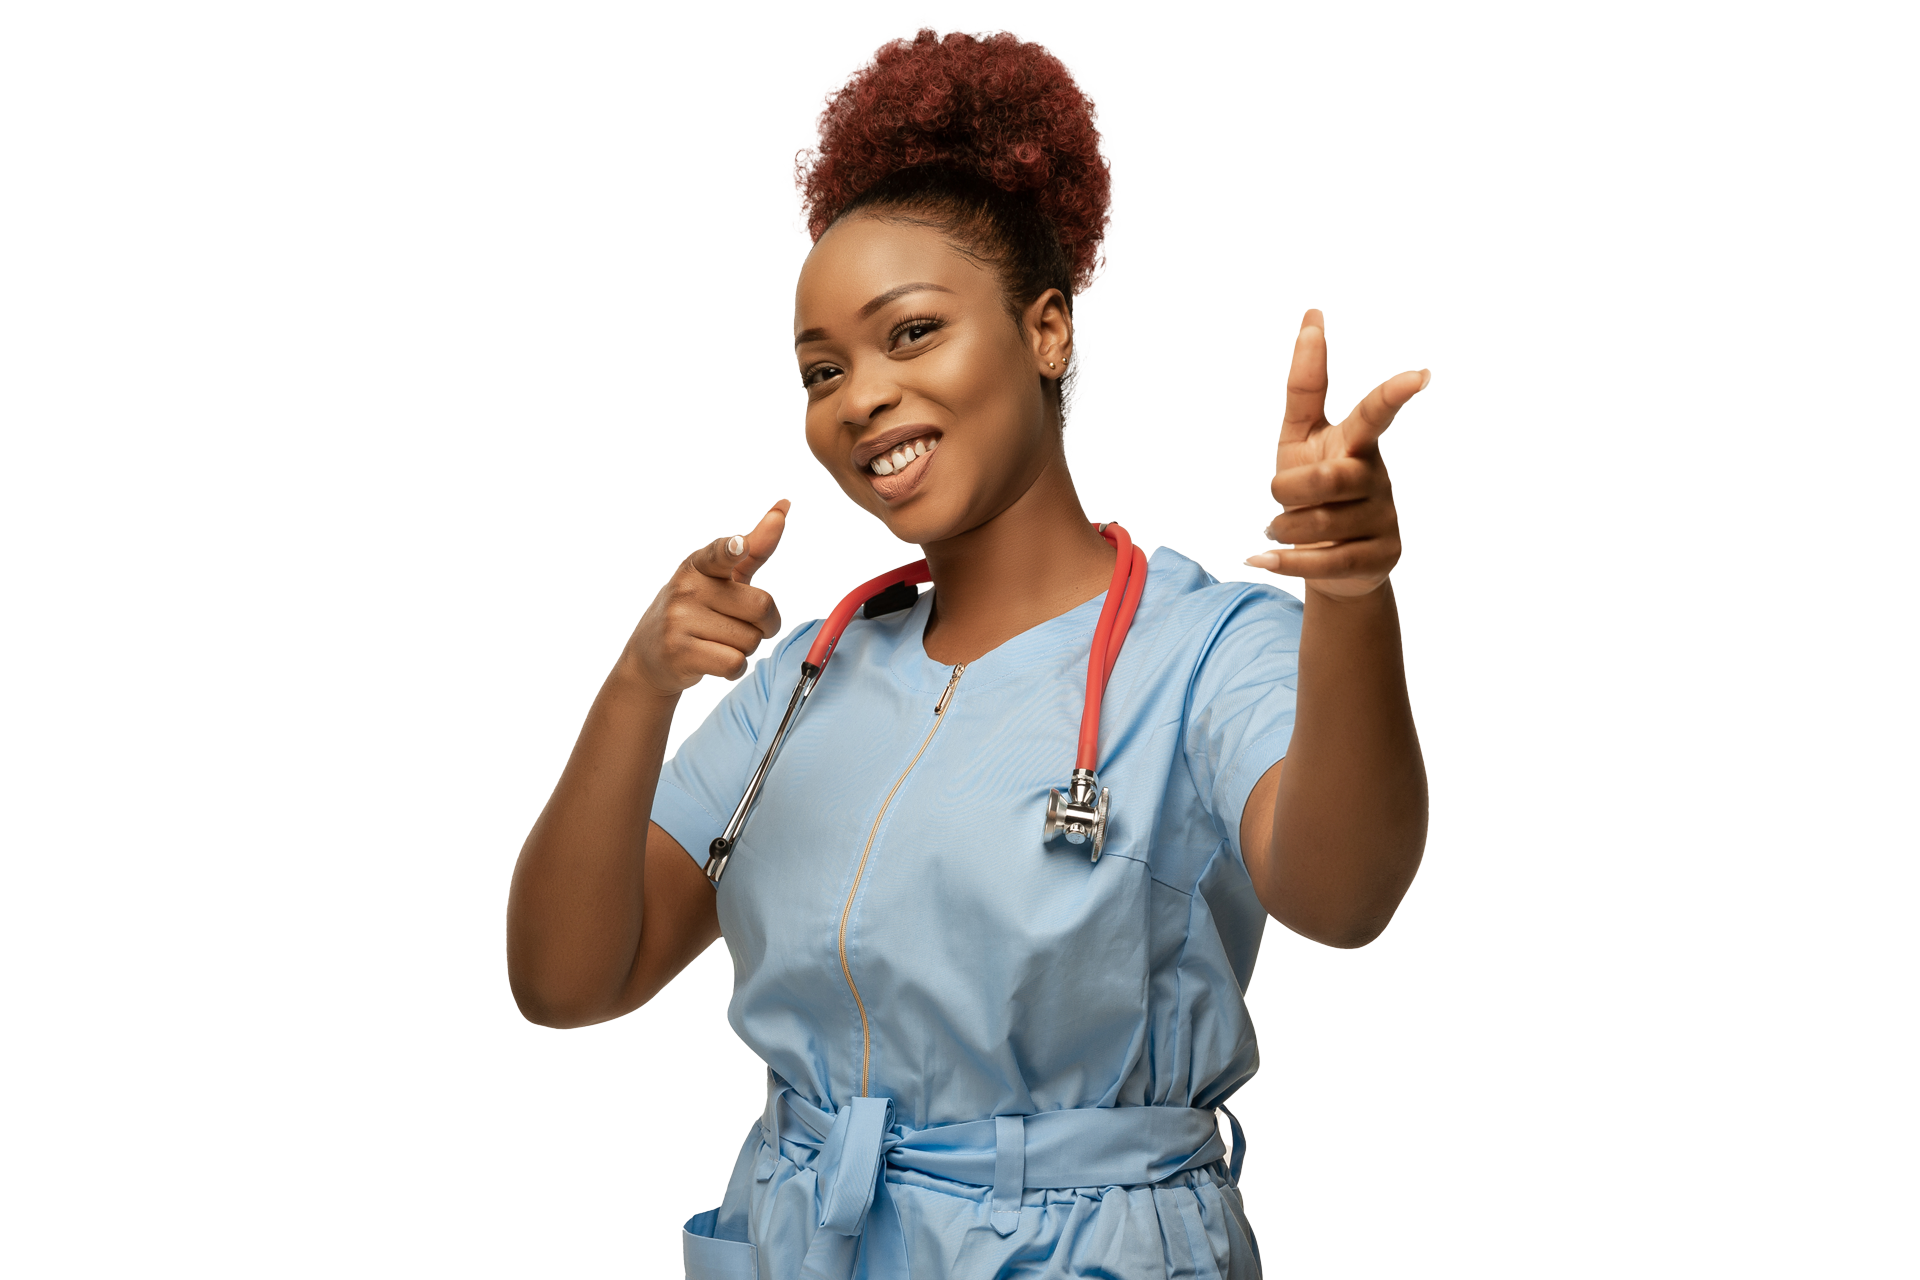 Staffing Solutions for Nurses and Healthcare Professionals – RNs, LPNs, CNAs, and More.